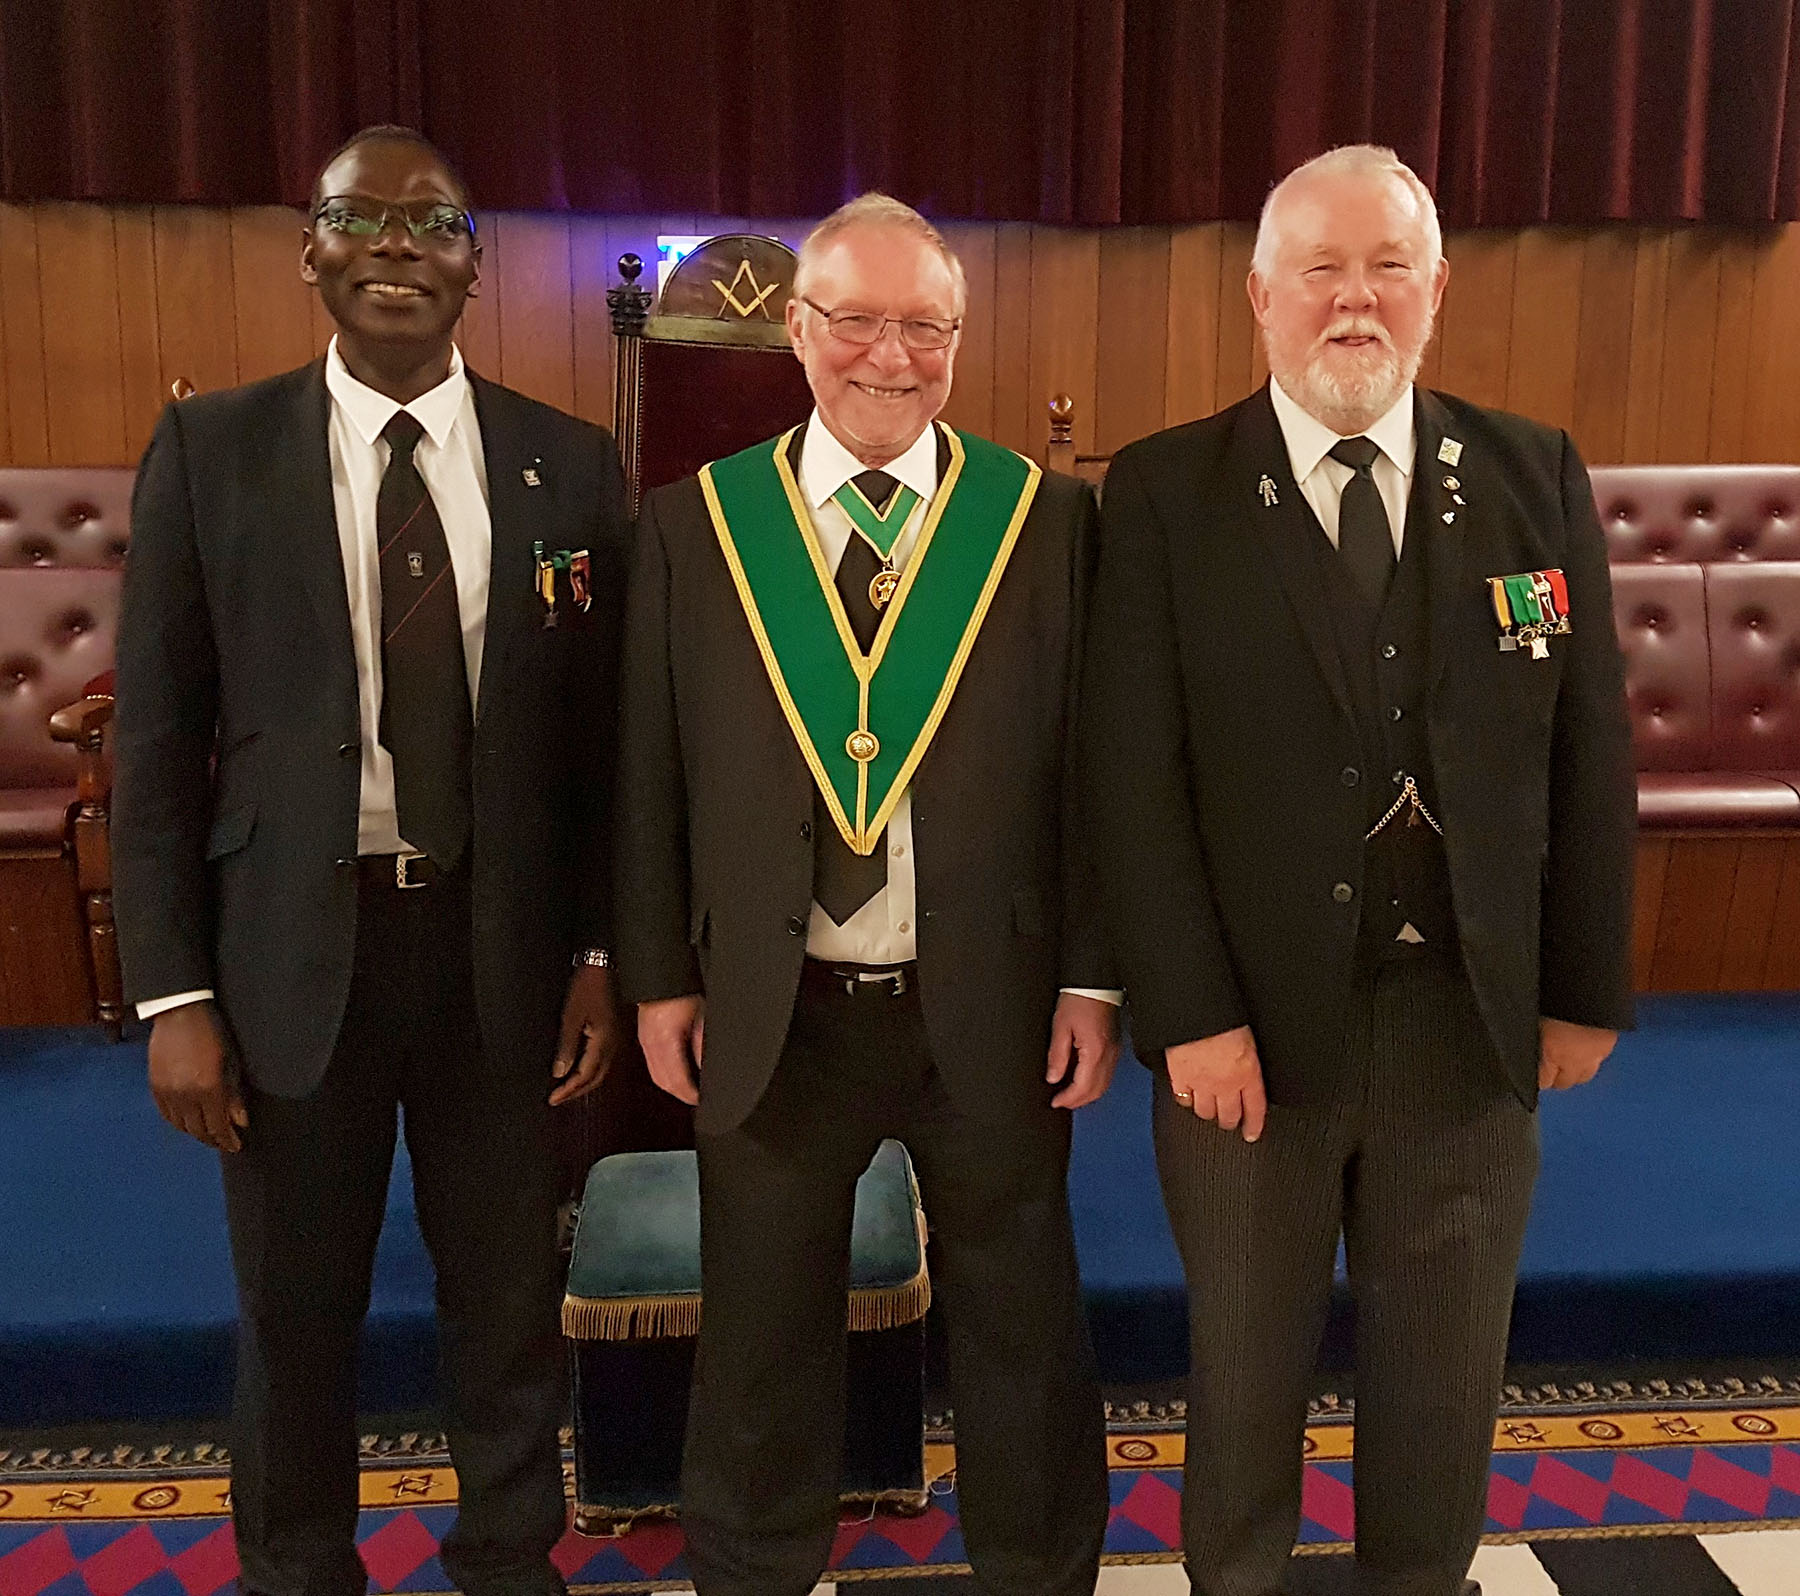 Our District Grand Prefect and District Grand Secretary visit the District of East Lancs